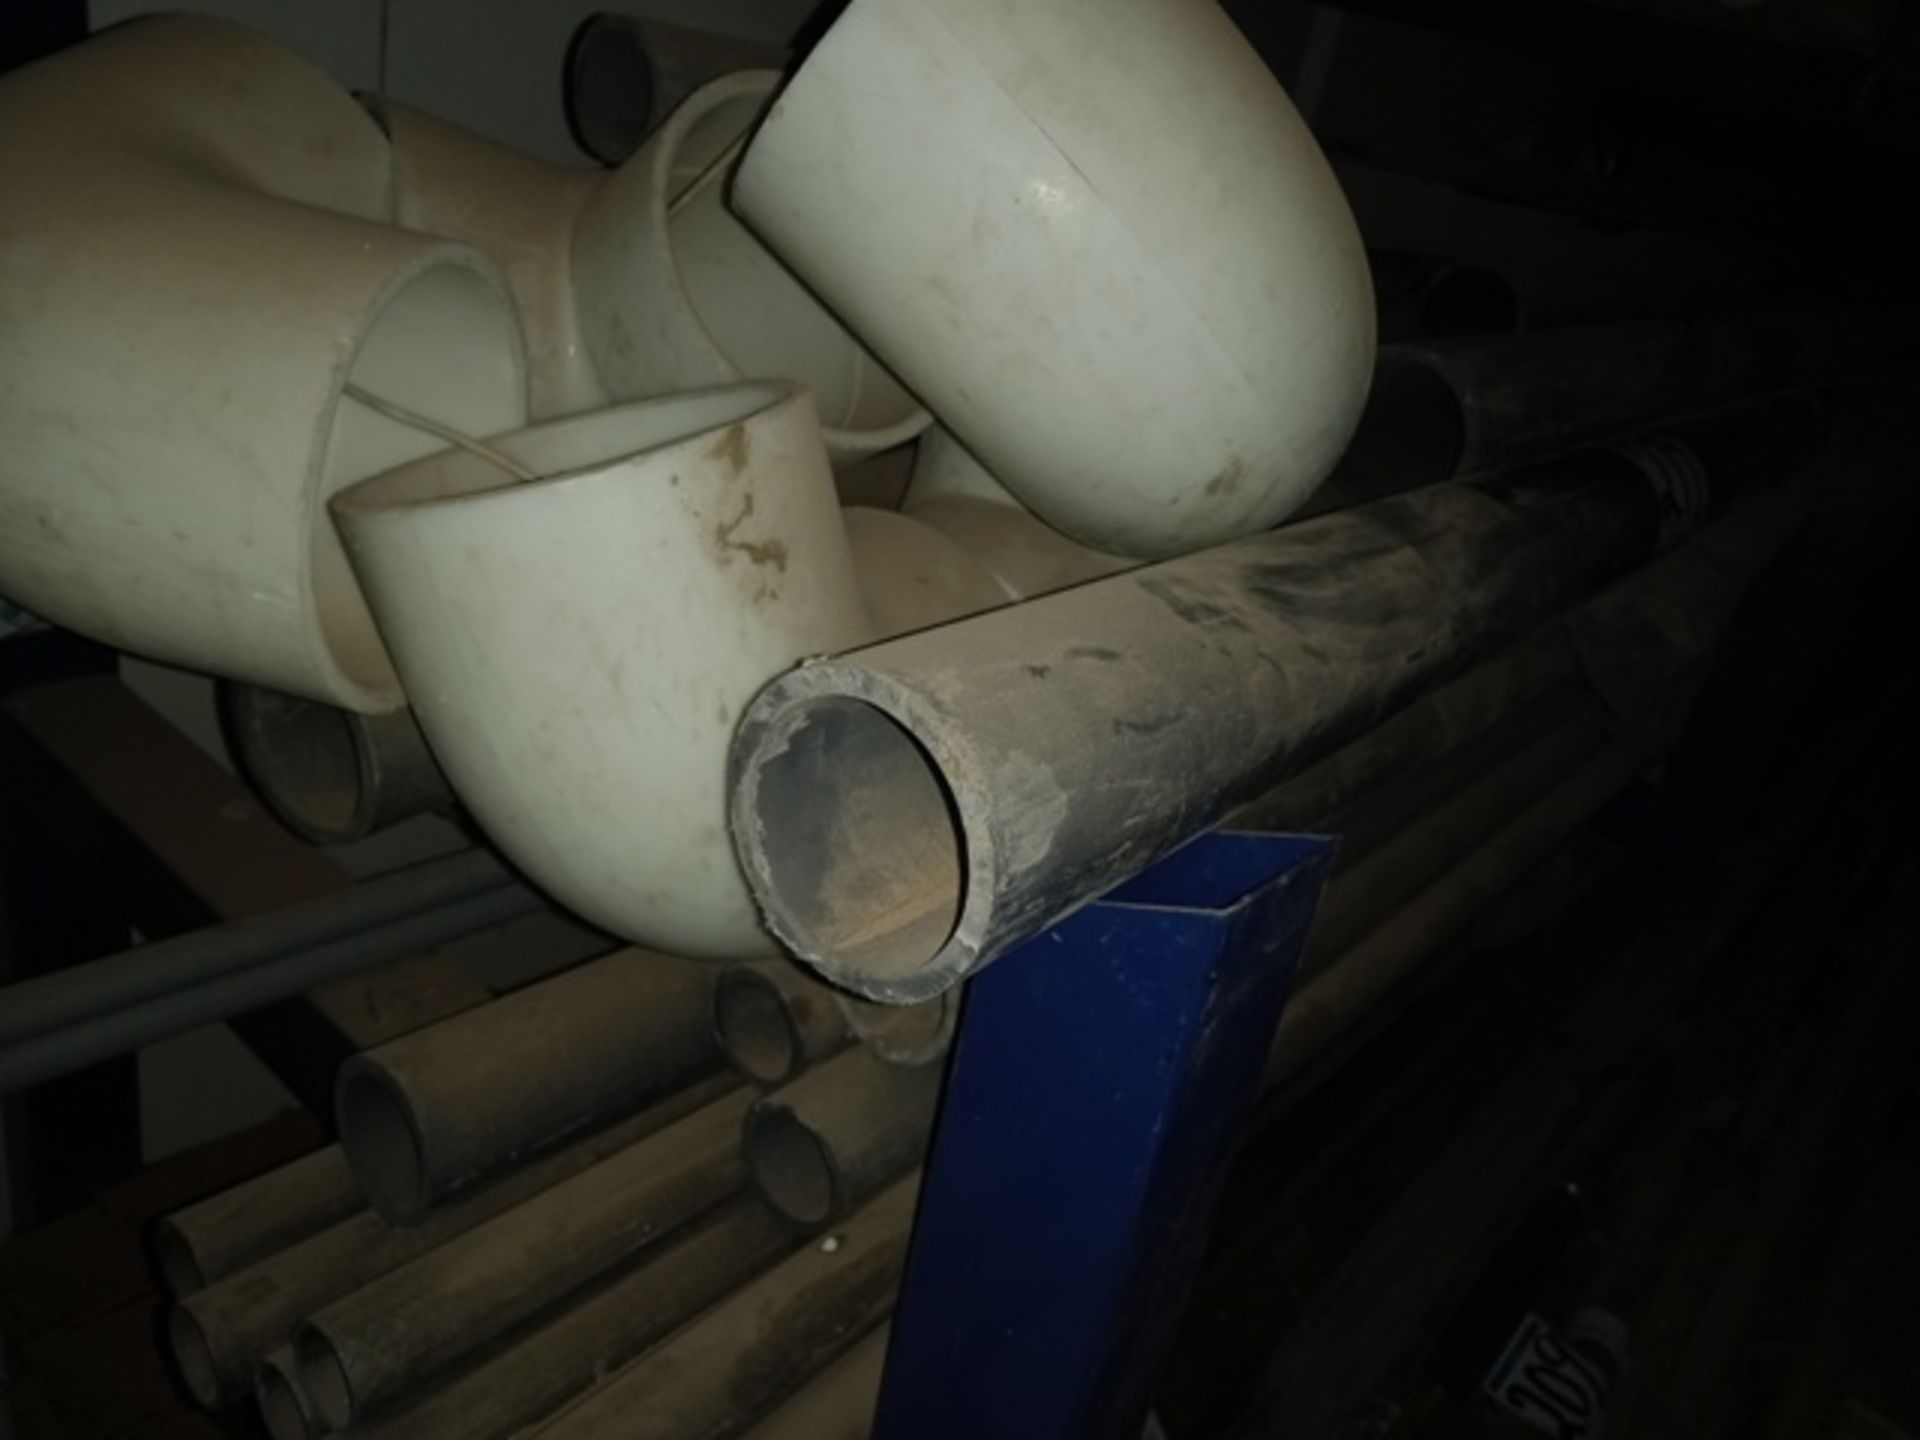 Lot of (1) Metallic Rack with Hydraulic PVC Pipe, Different Sizes (1" - 4") - Image 4 of 7